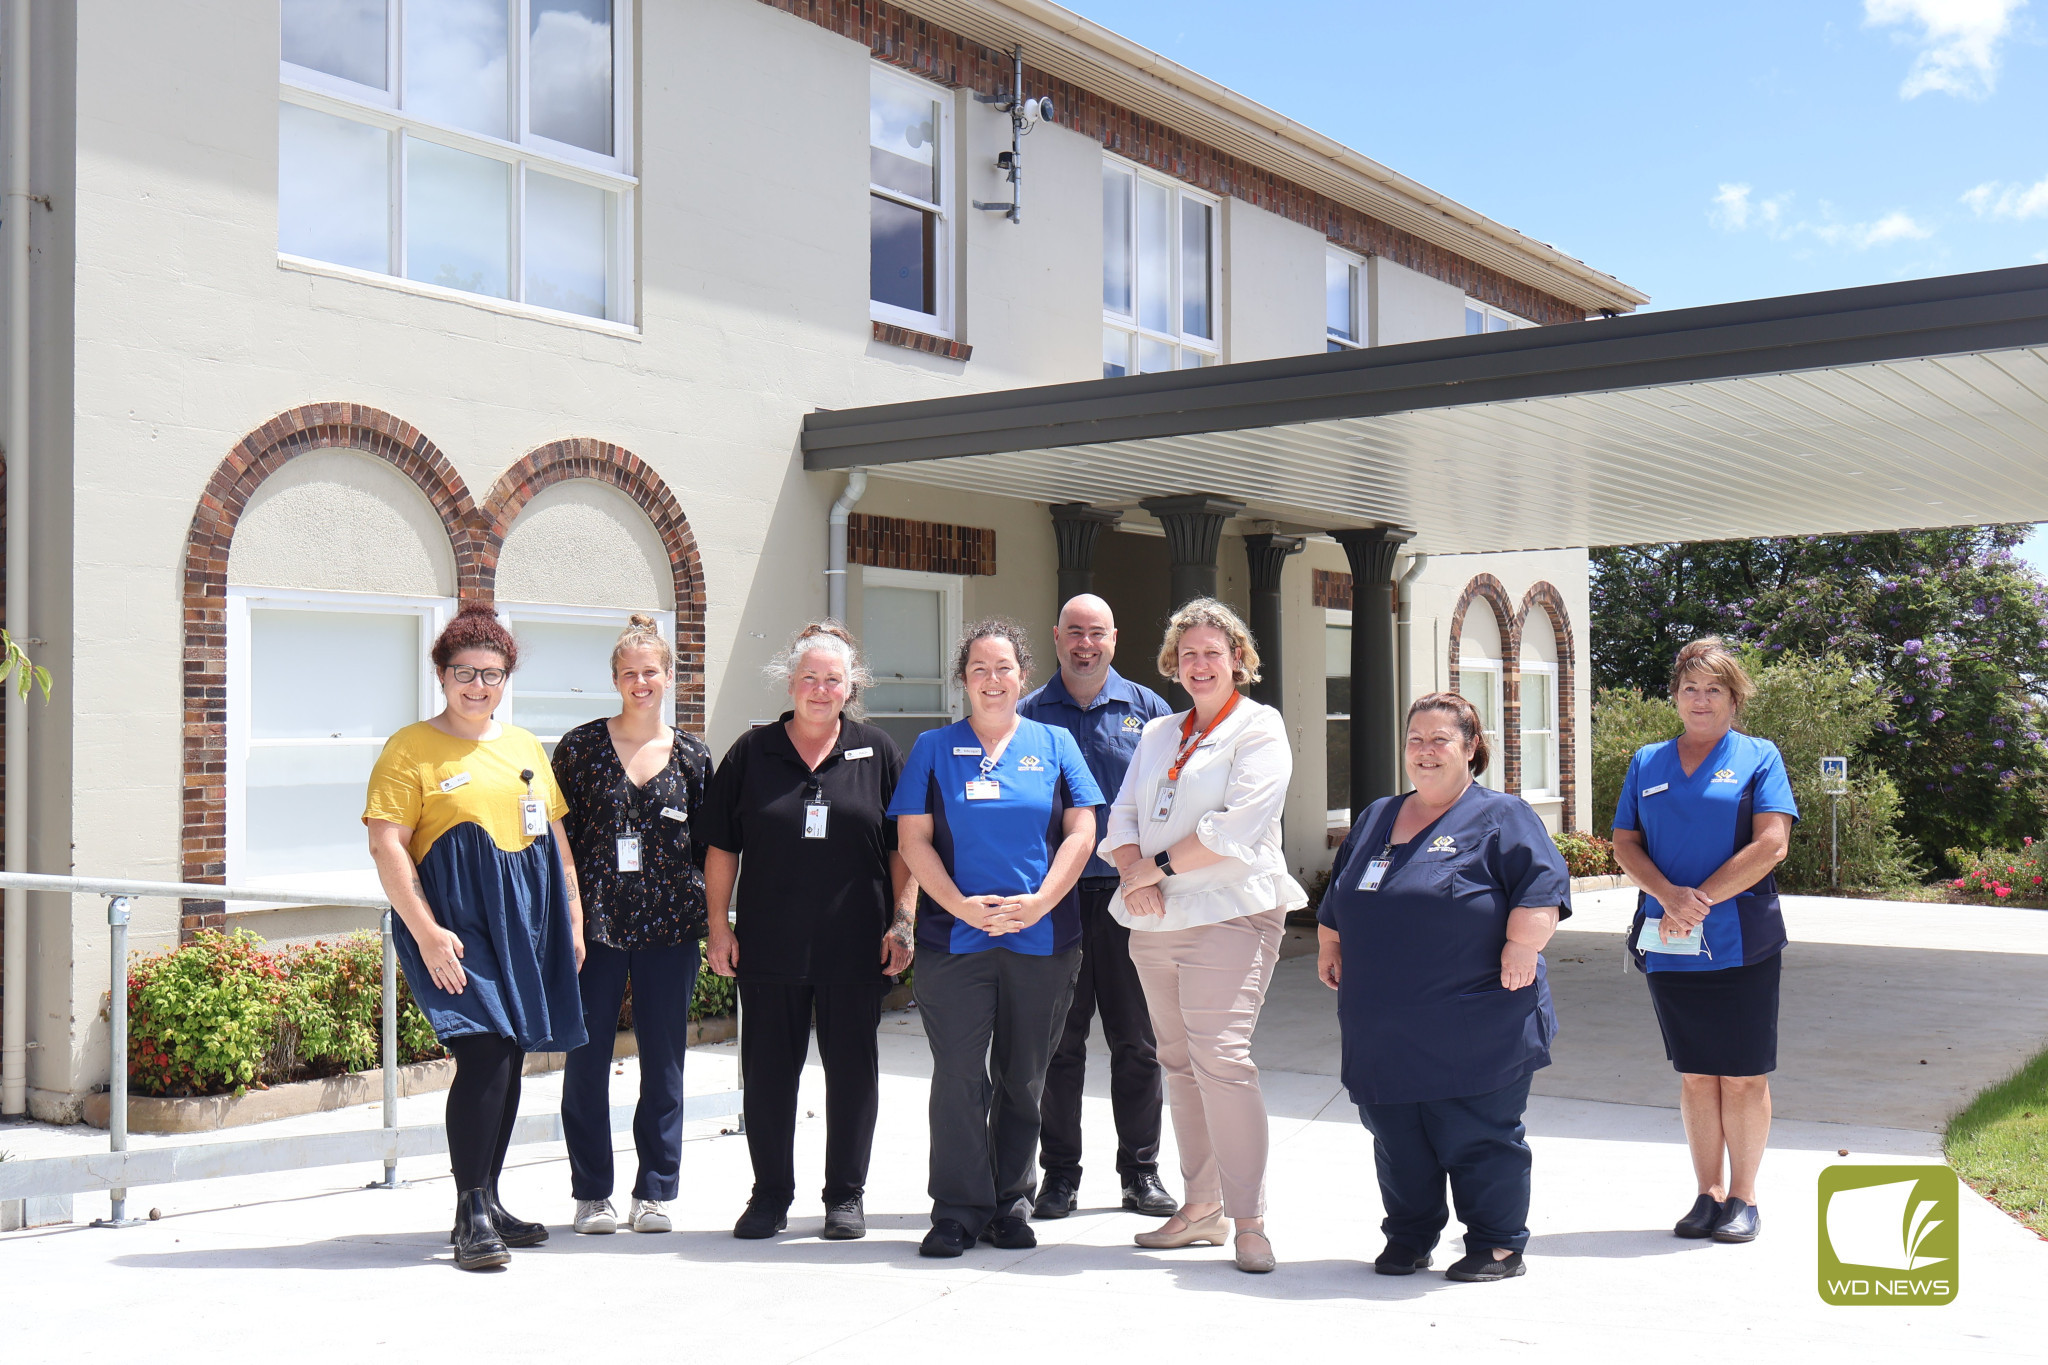 The stars aligned: Terang and Mortlake Health Service has welcomed a range of new staff across its services this year as a changing of the guard ushers in a new era of care.